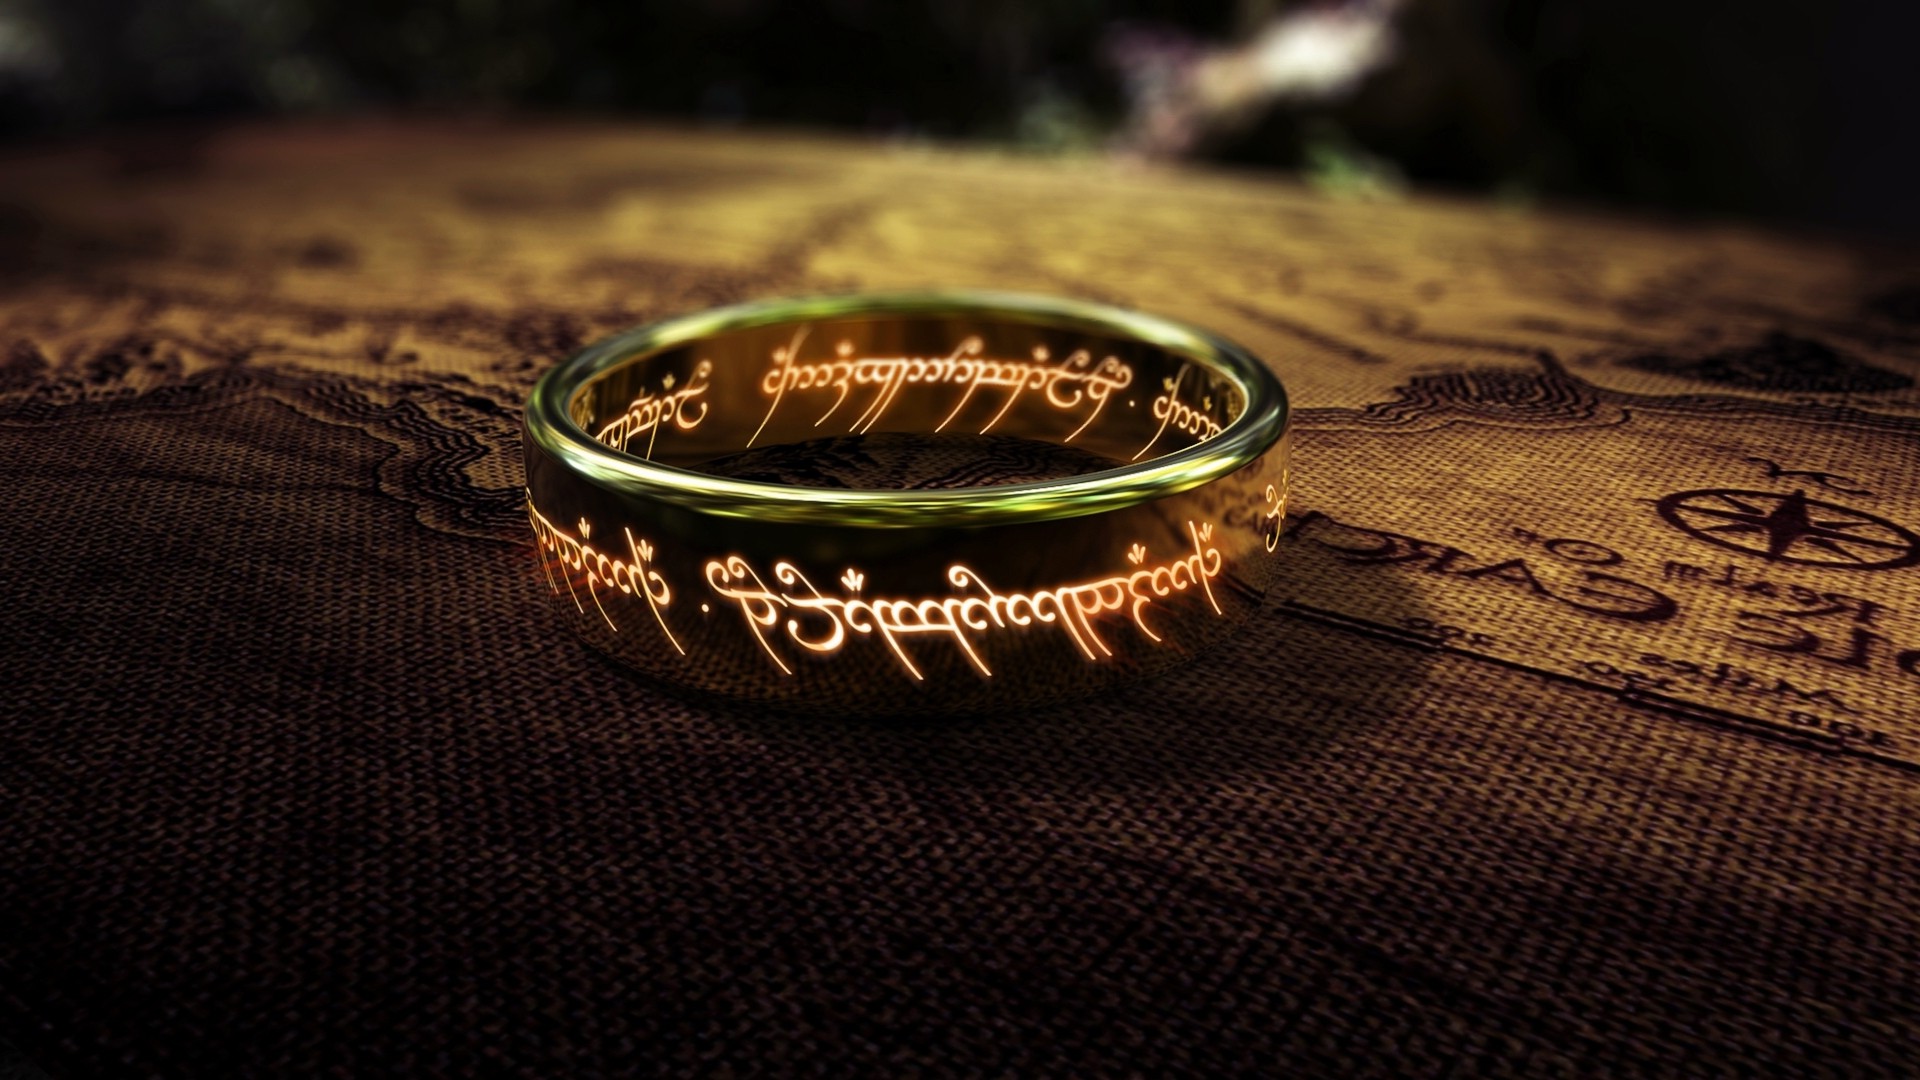 fantasy Art, The Lord Of The Rings, Map, Rings, Depth Of Field, The One